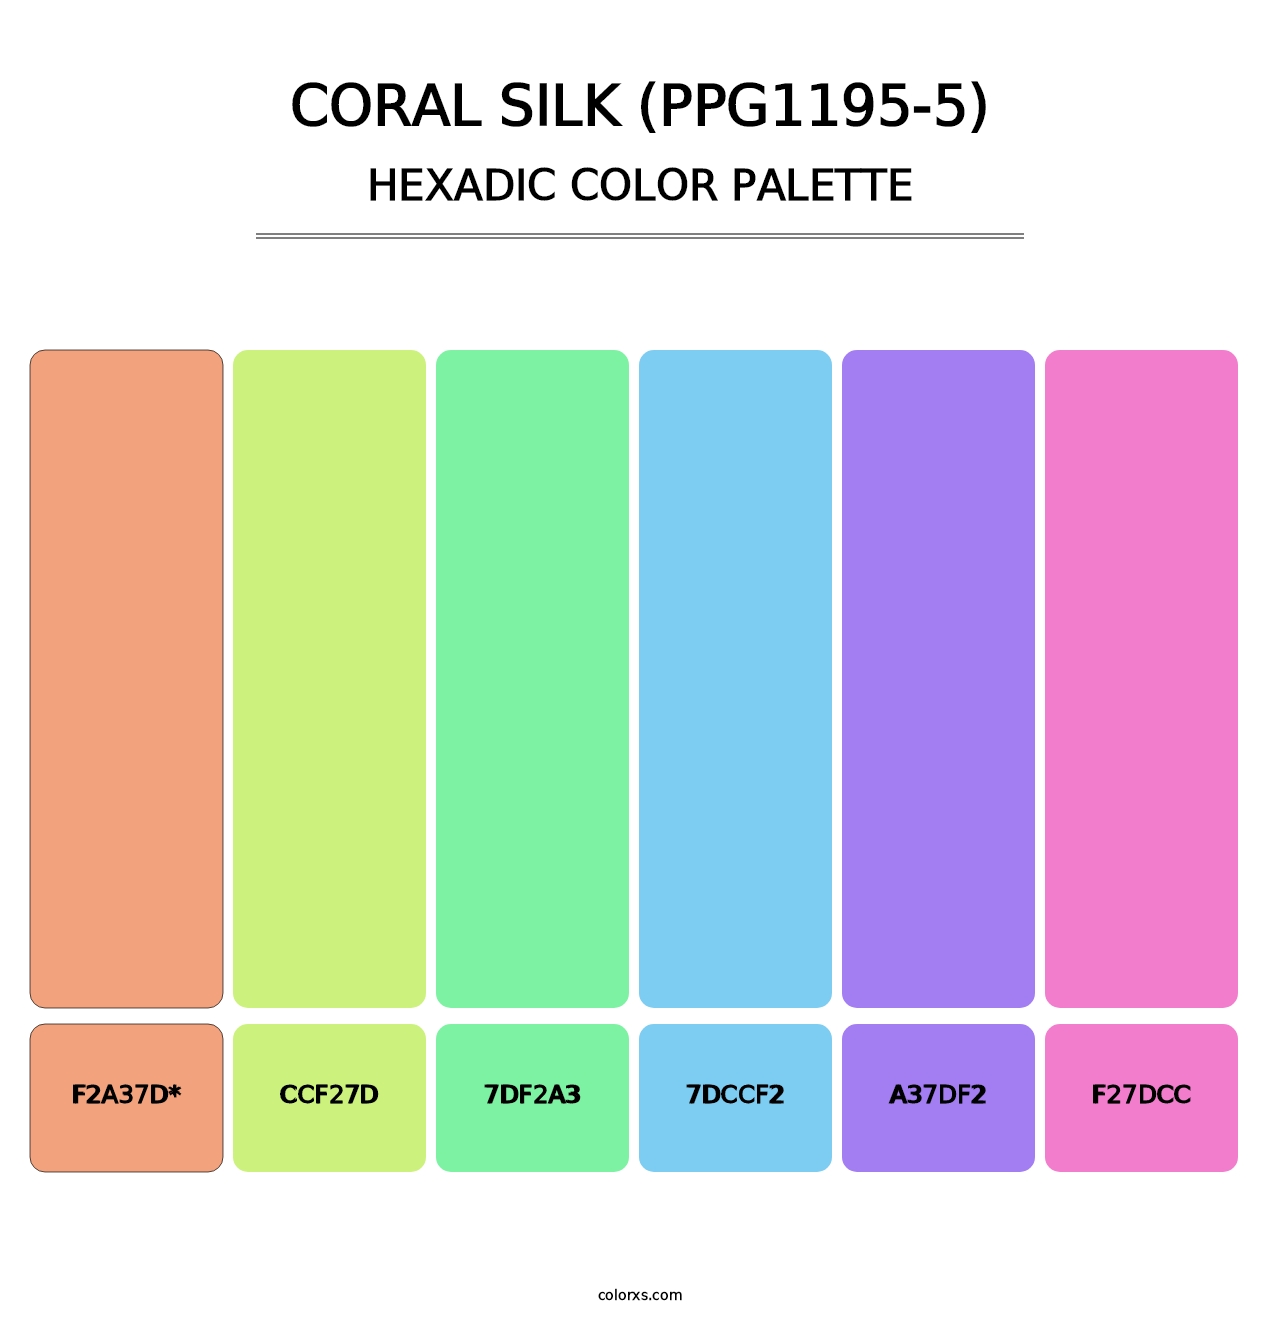 Coral Silk (PPG1195-5) - Hexadic Color Palette